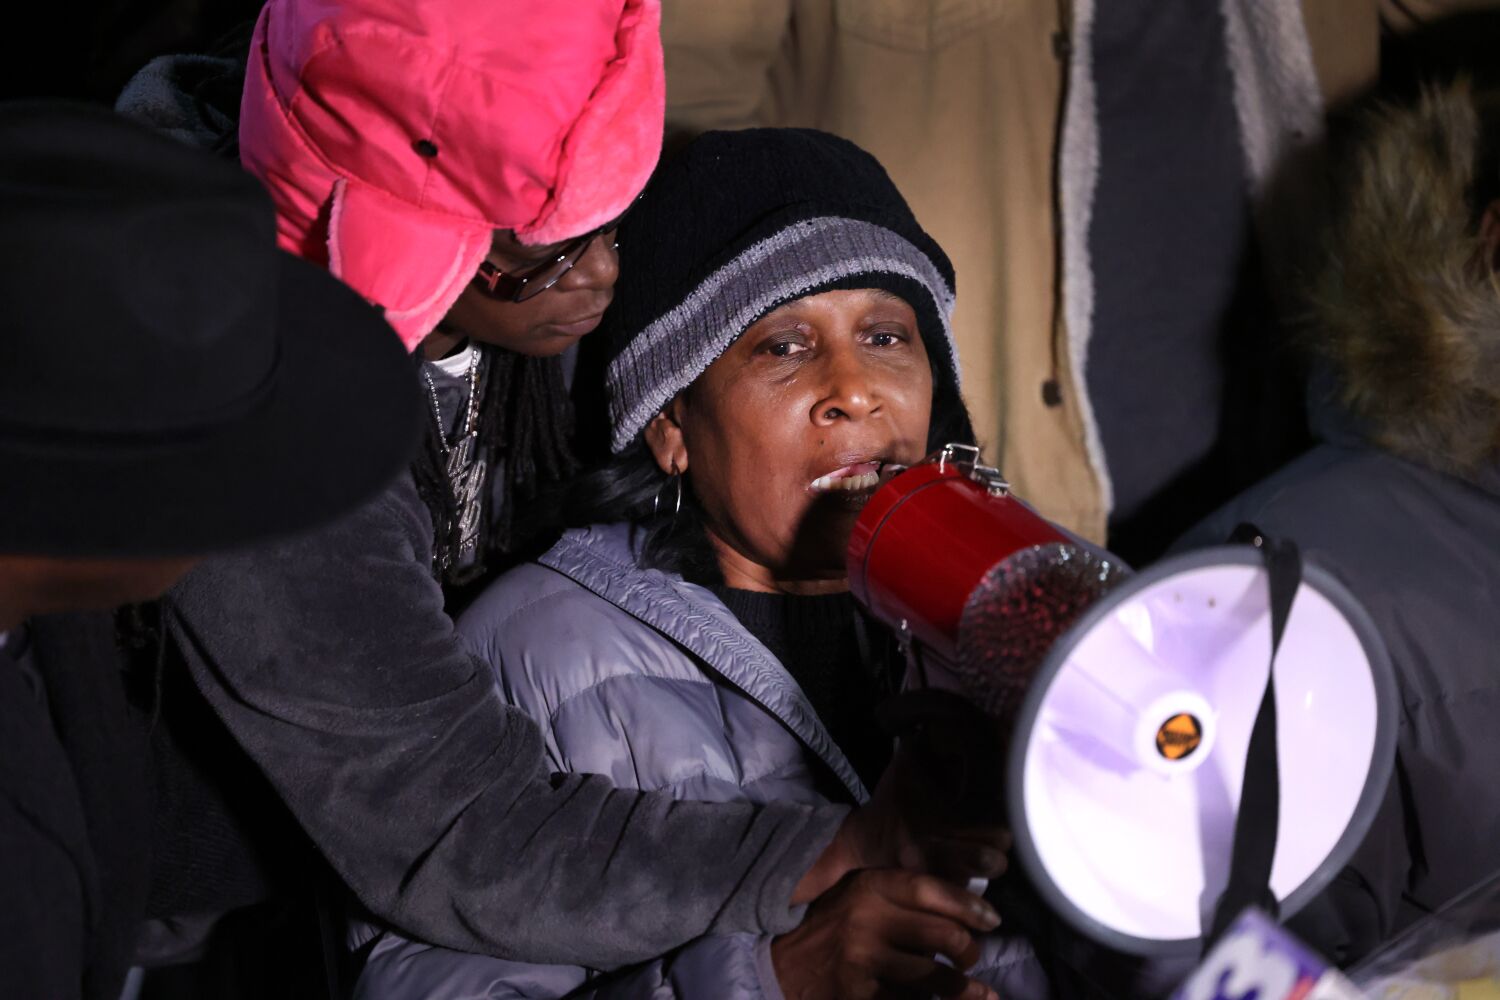 Mother of Tyre Nichols calls for peaceful protests when 'horrific' video is released